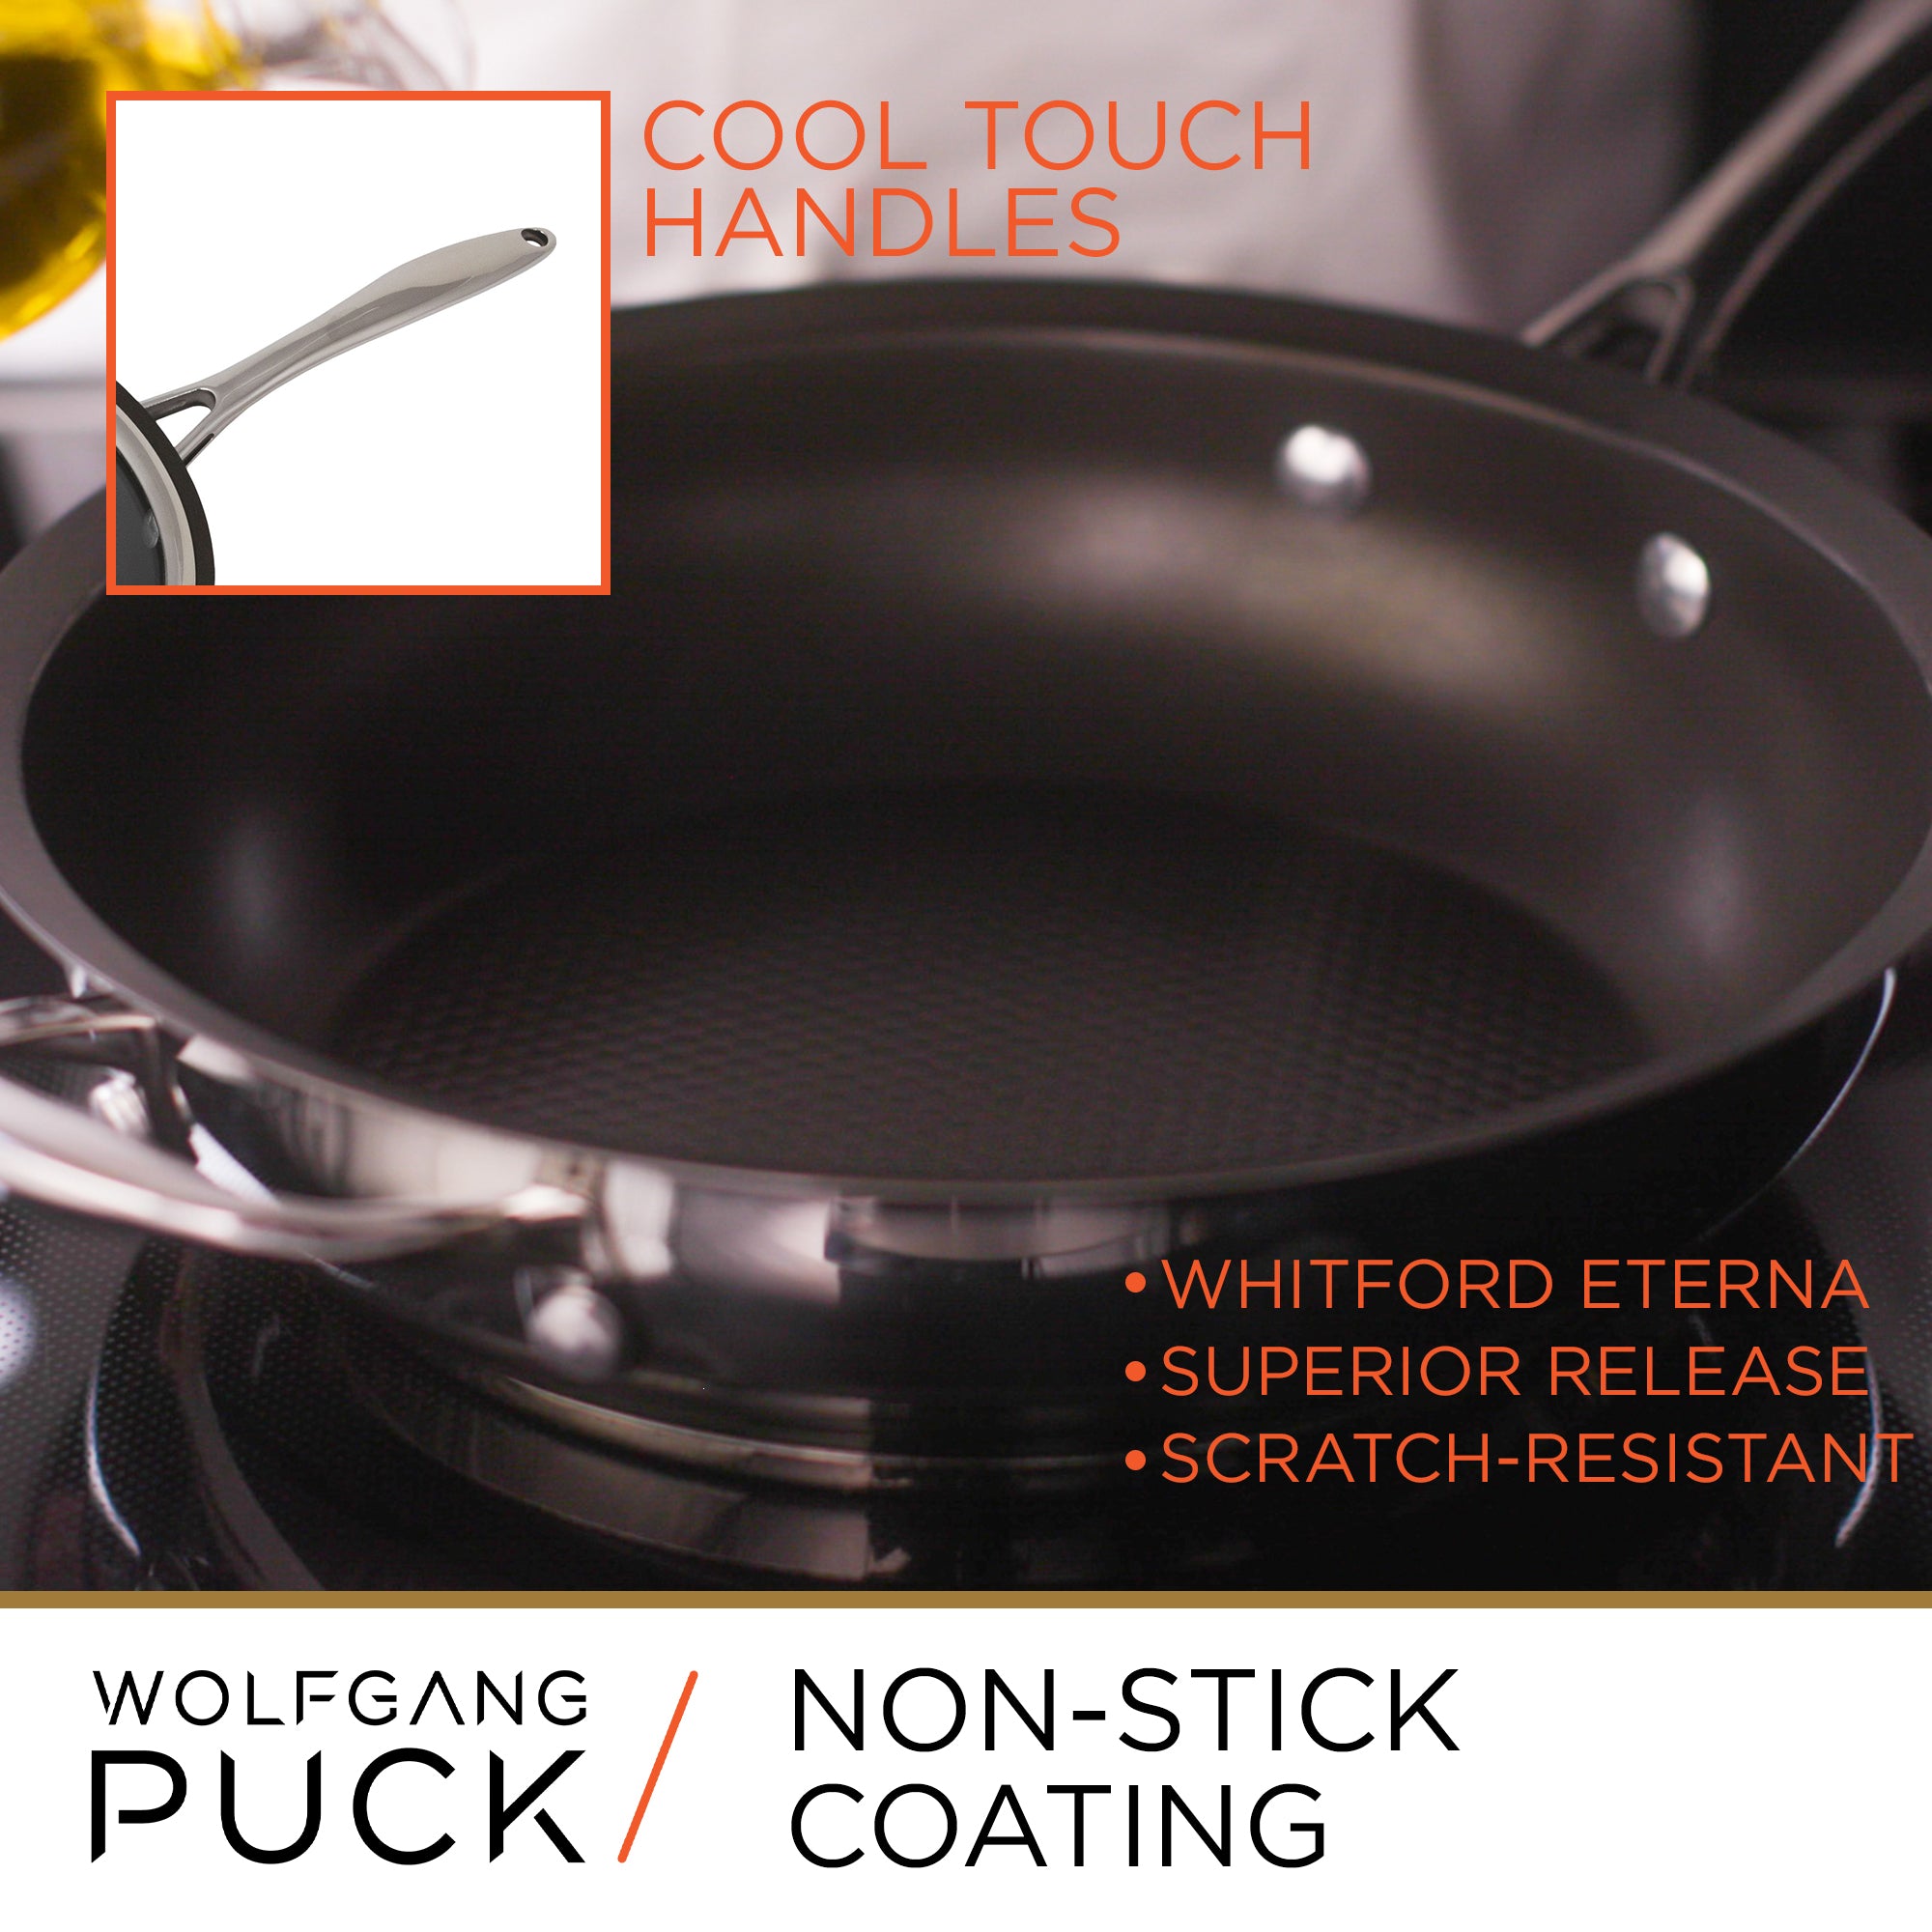 Stainless Steel Cookware Set with cool touch handles